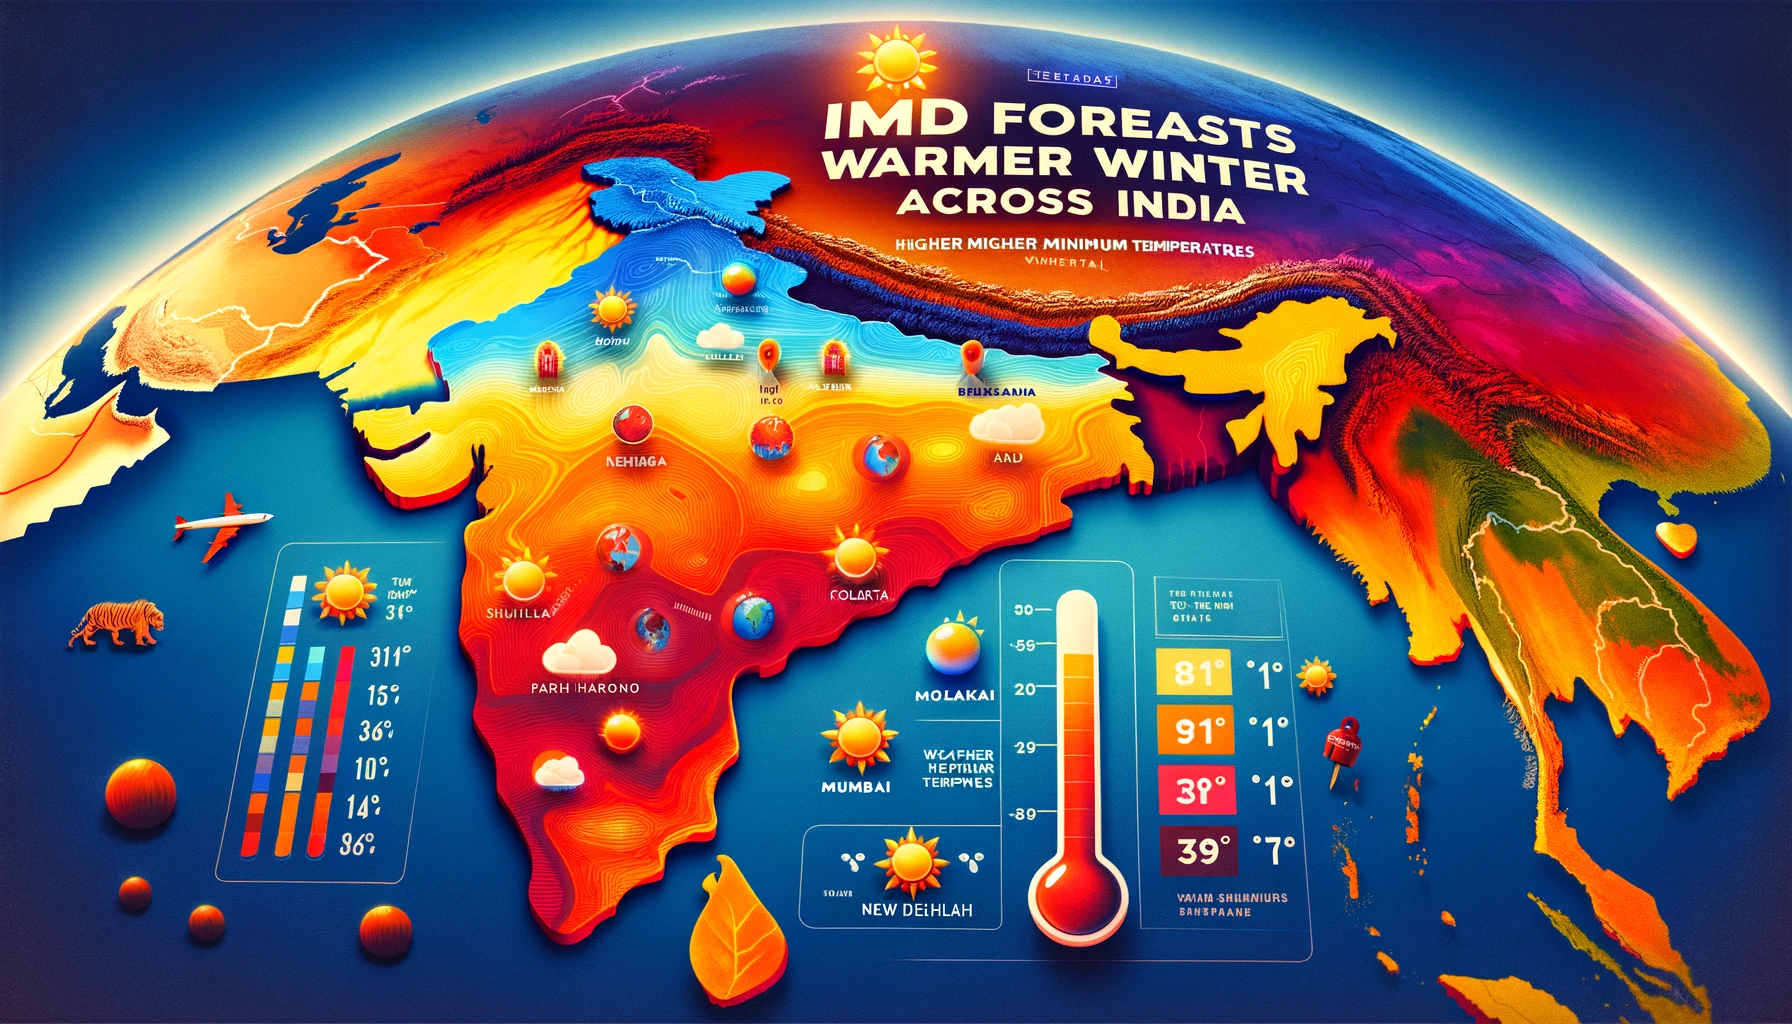 IMD Forecasts Warmer Winter Across India with Higher Minimum Temperatures